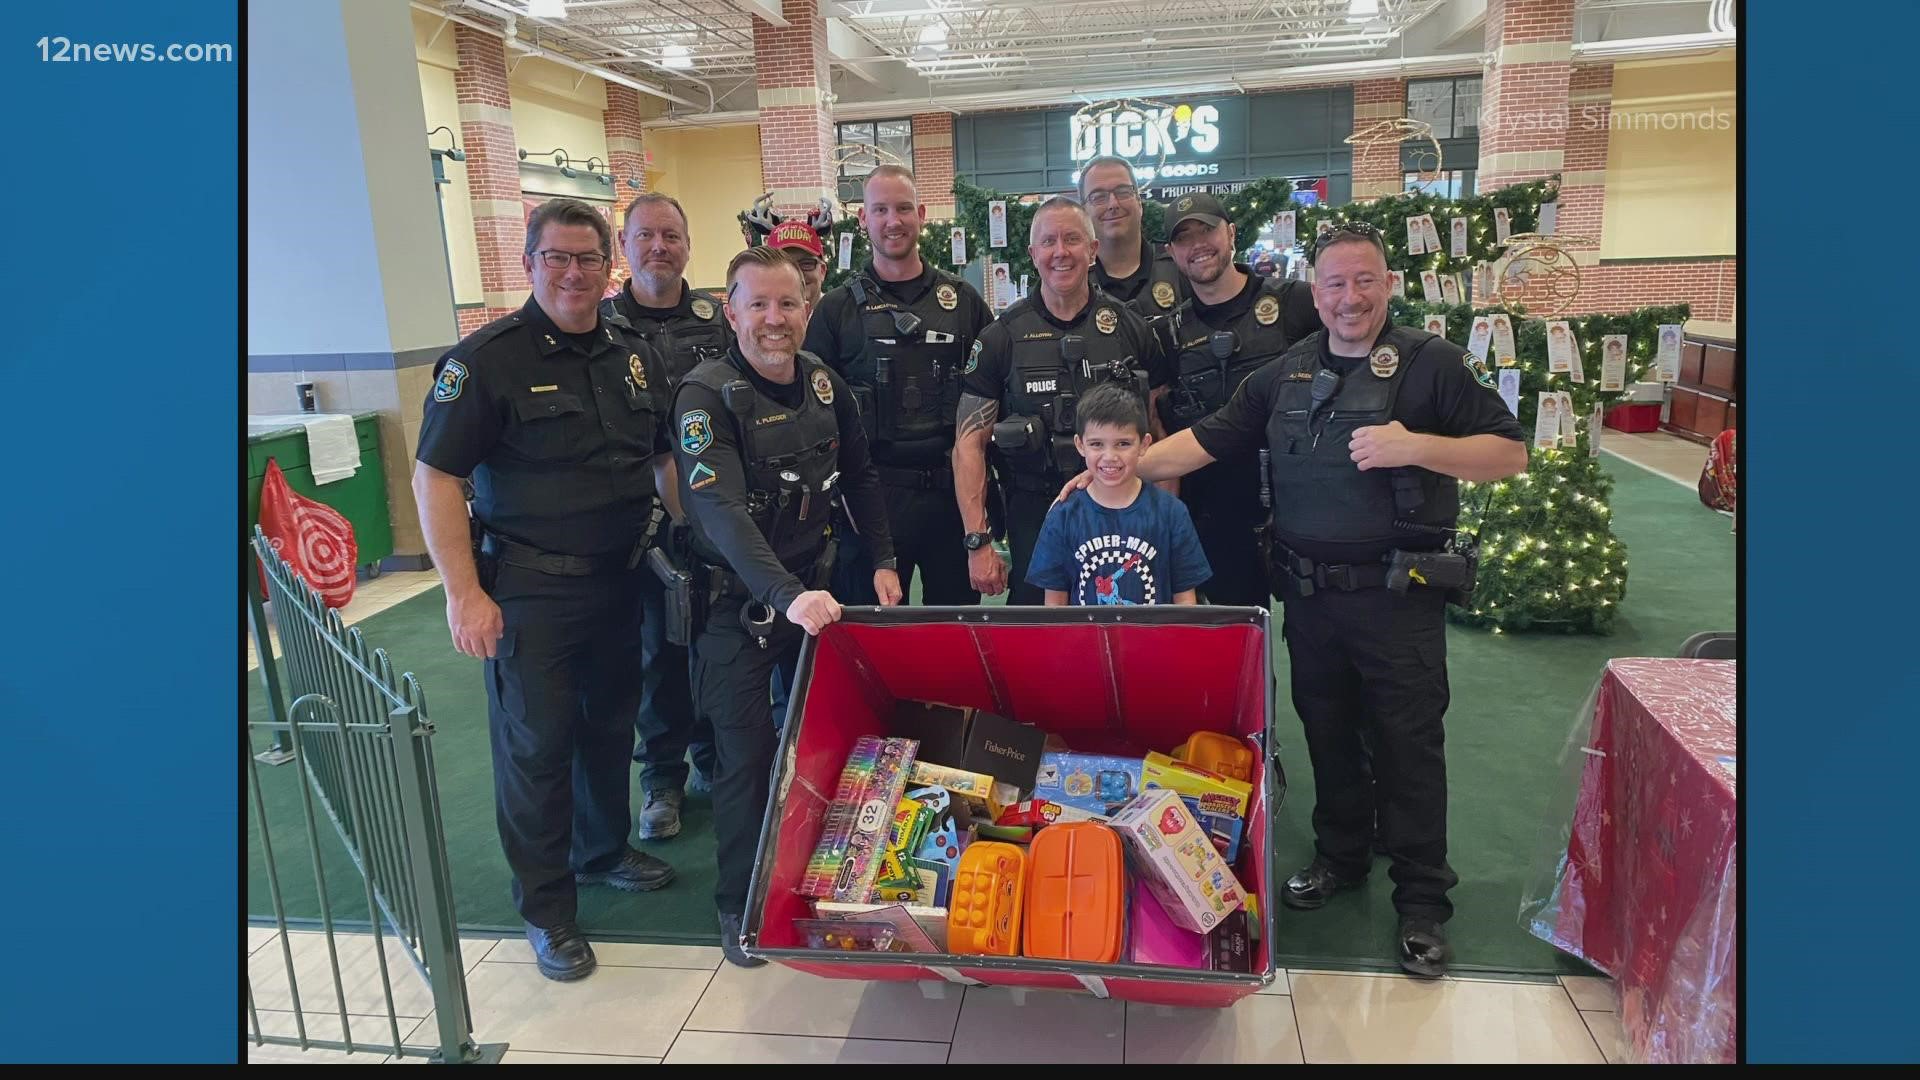 A selfless 8-year-old in Peoria gave up his birthday gifts so that other kids could have Christmas.